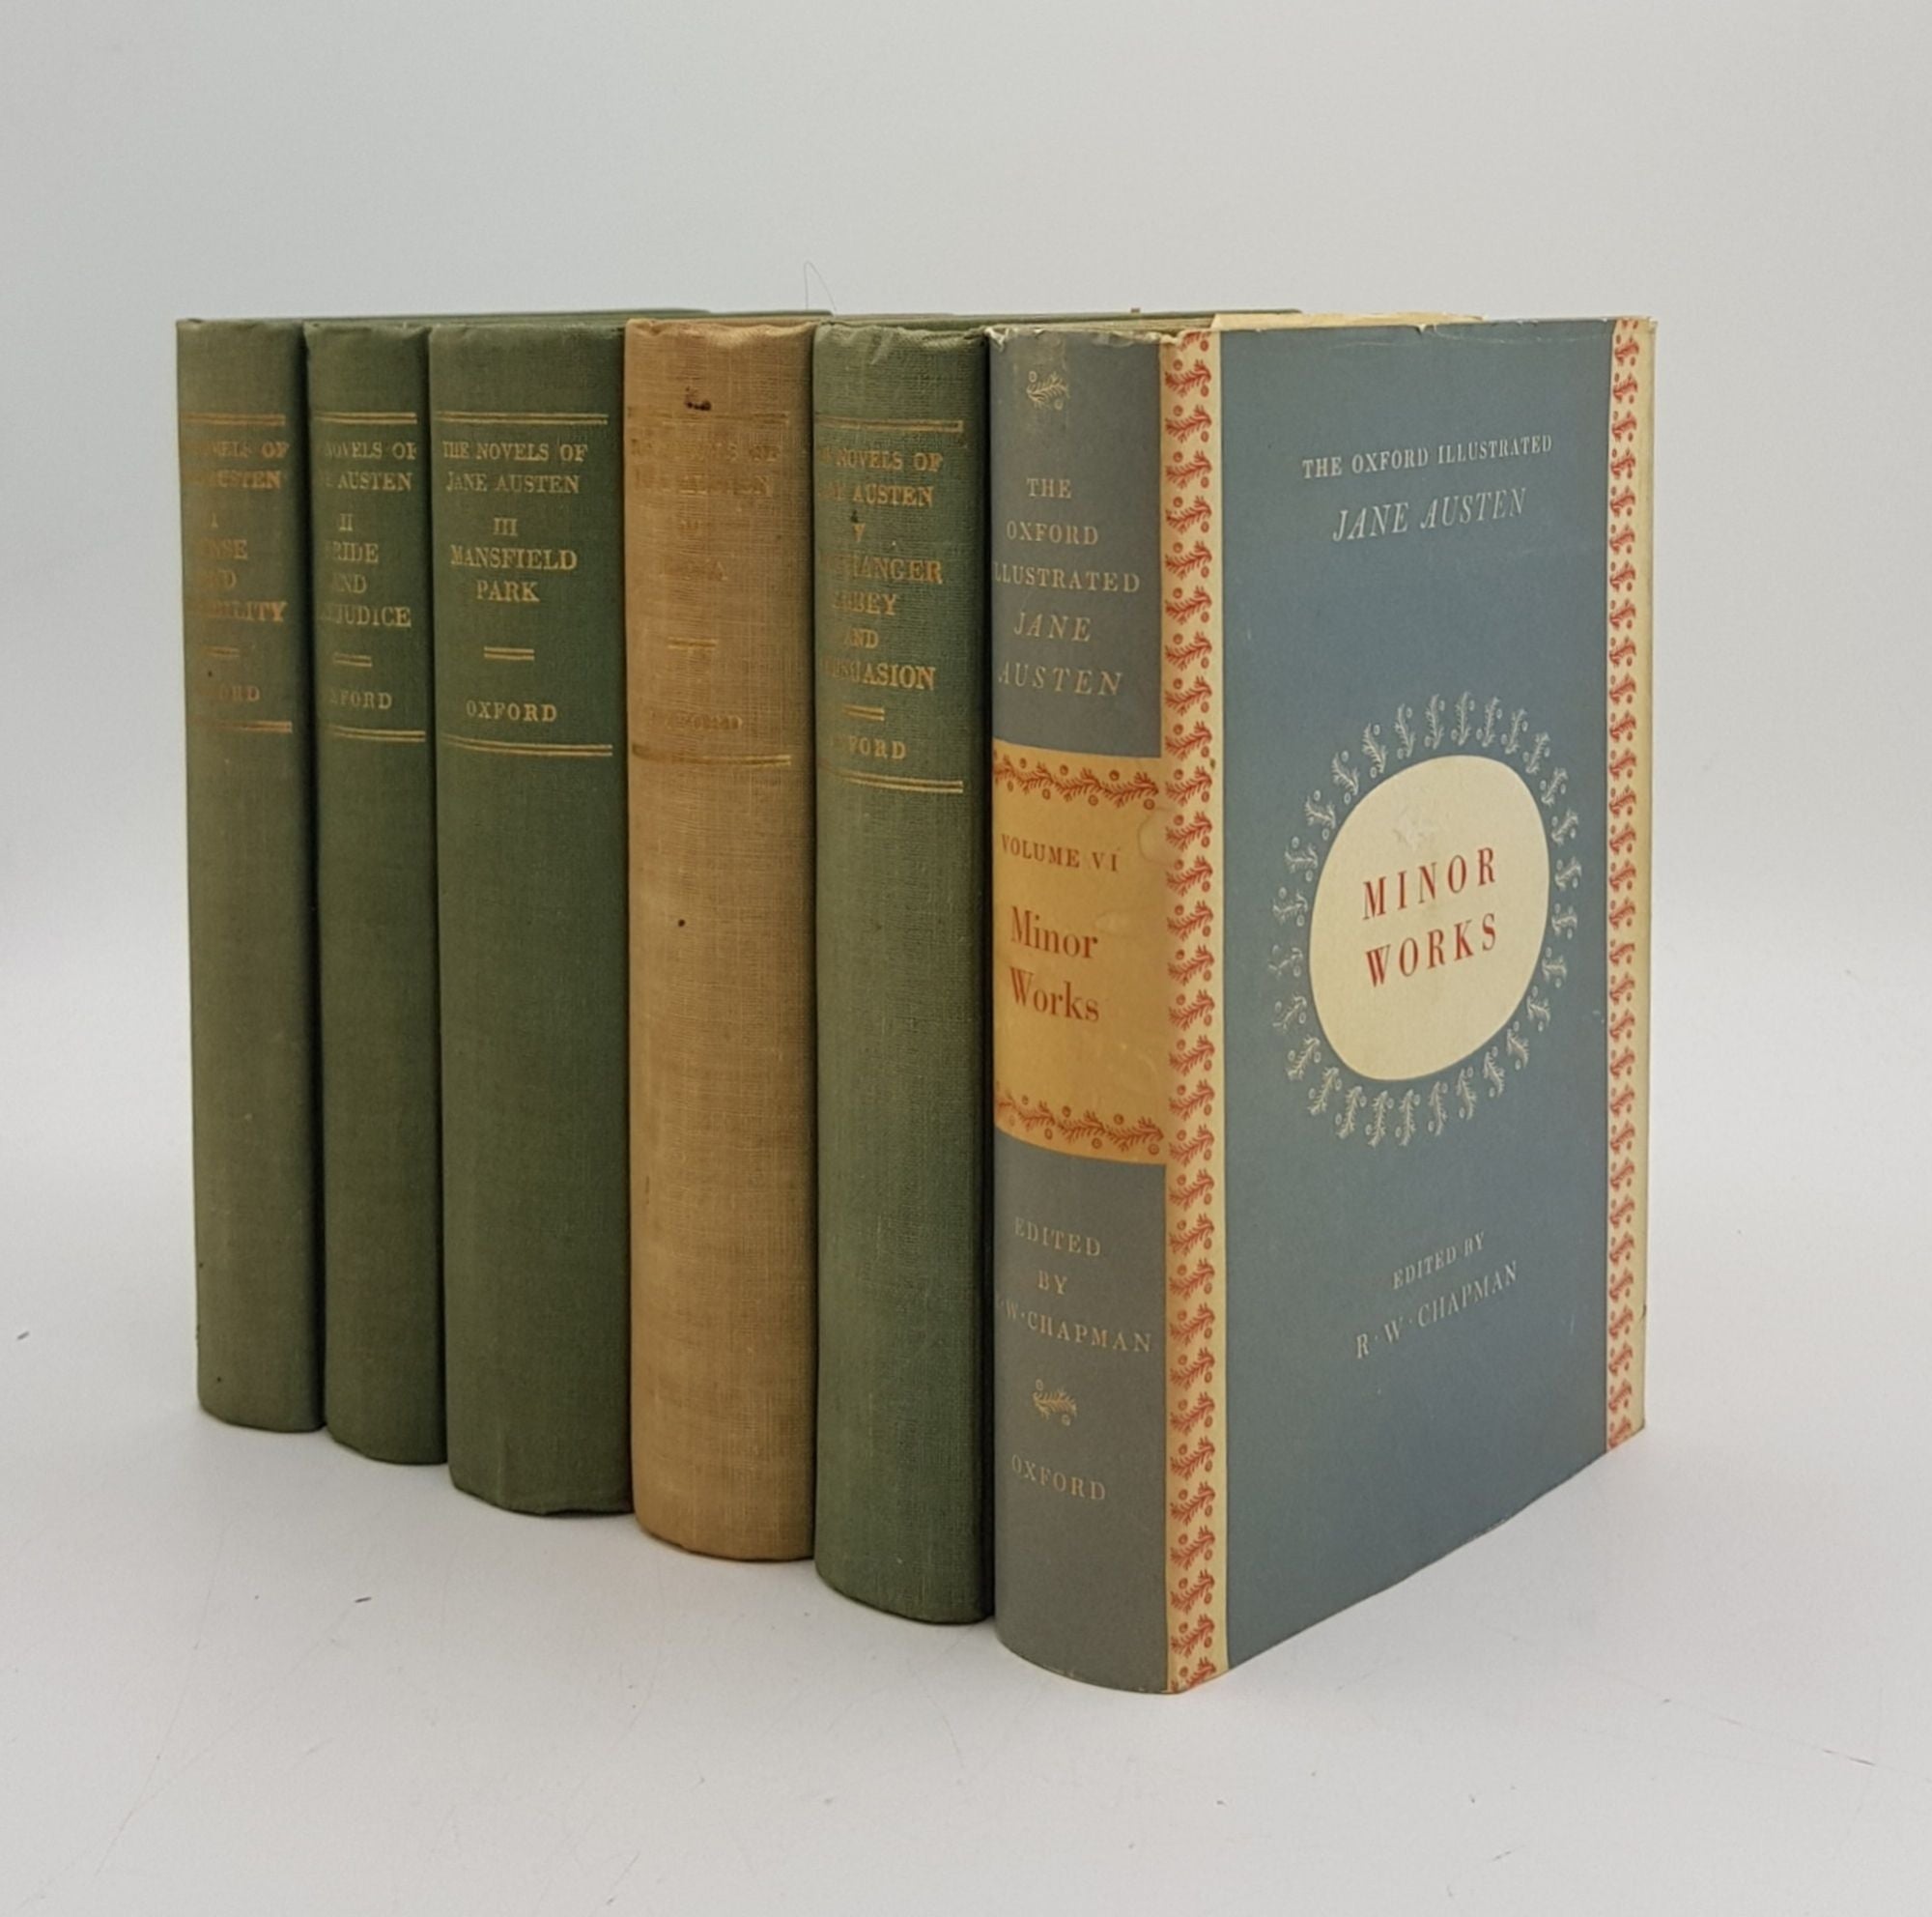 AUSTEN Jane, CHAPMAN R.W. - The Novels of Jane Austen the Text Based on Collation of the Early Editions in Five Volumes [&] Volume VI Minor Works